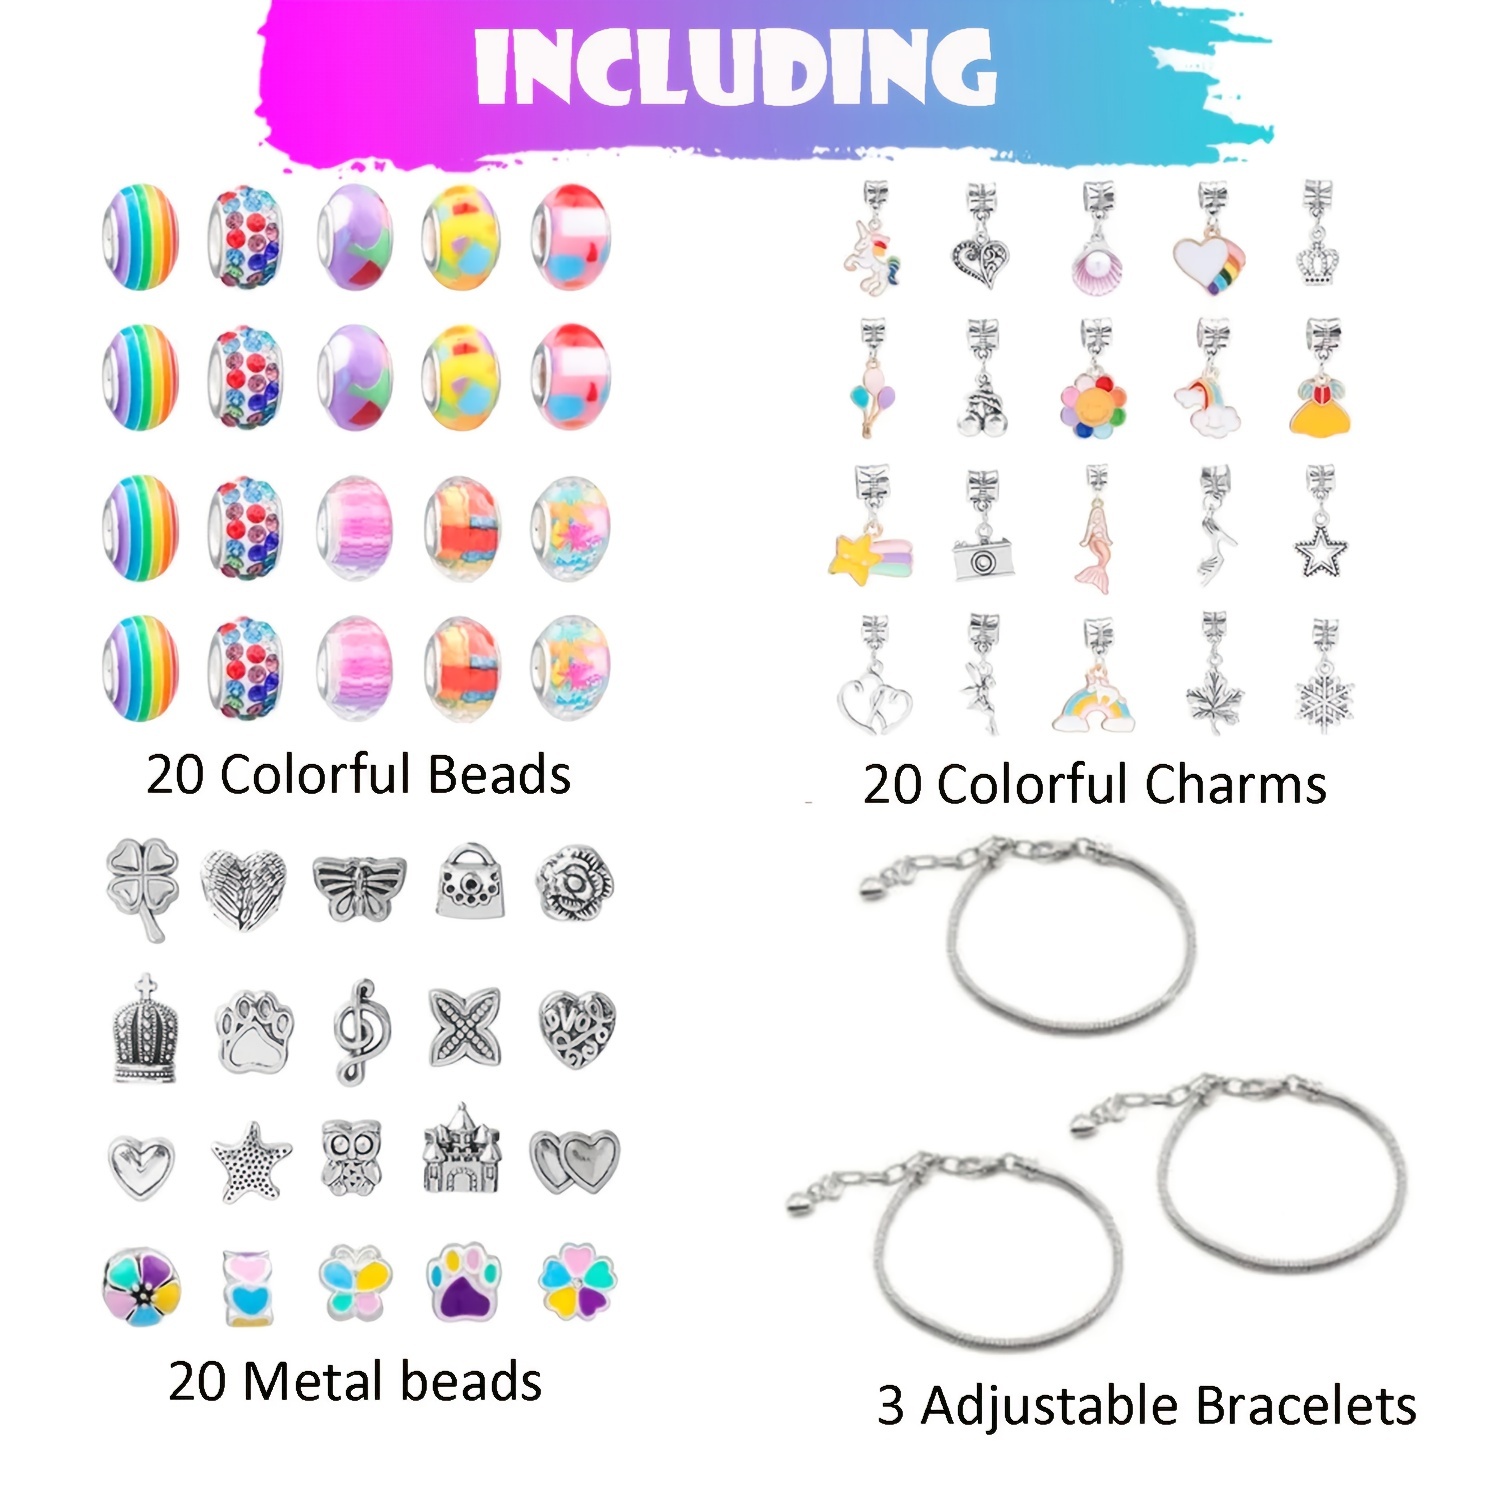 BDBKYWY Charm Bracelet Making Kit & Unicorn/Mermaid Girl Toy- ideal Crafts  for Girls Ages 8-12 The Perfect Gifts for Girls who Inspire Imagination and  Create Magic with Art Set and Jewelry Making Kit